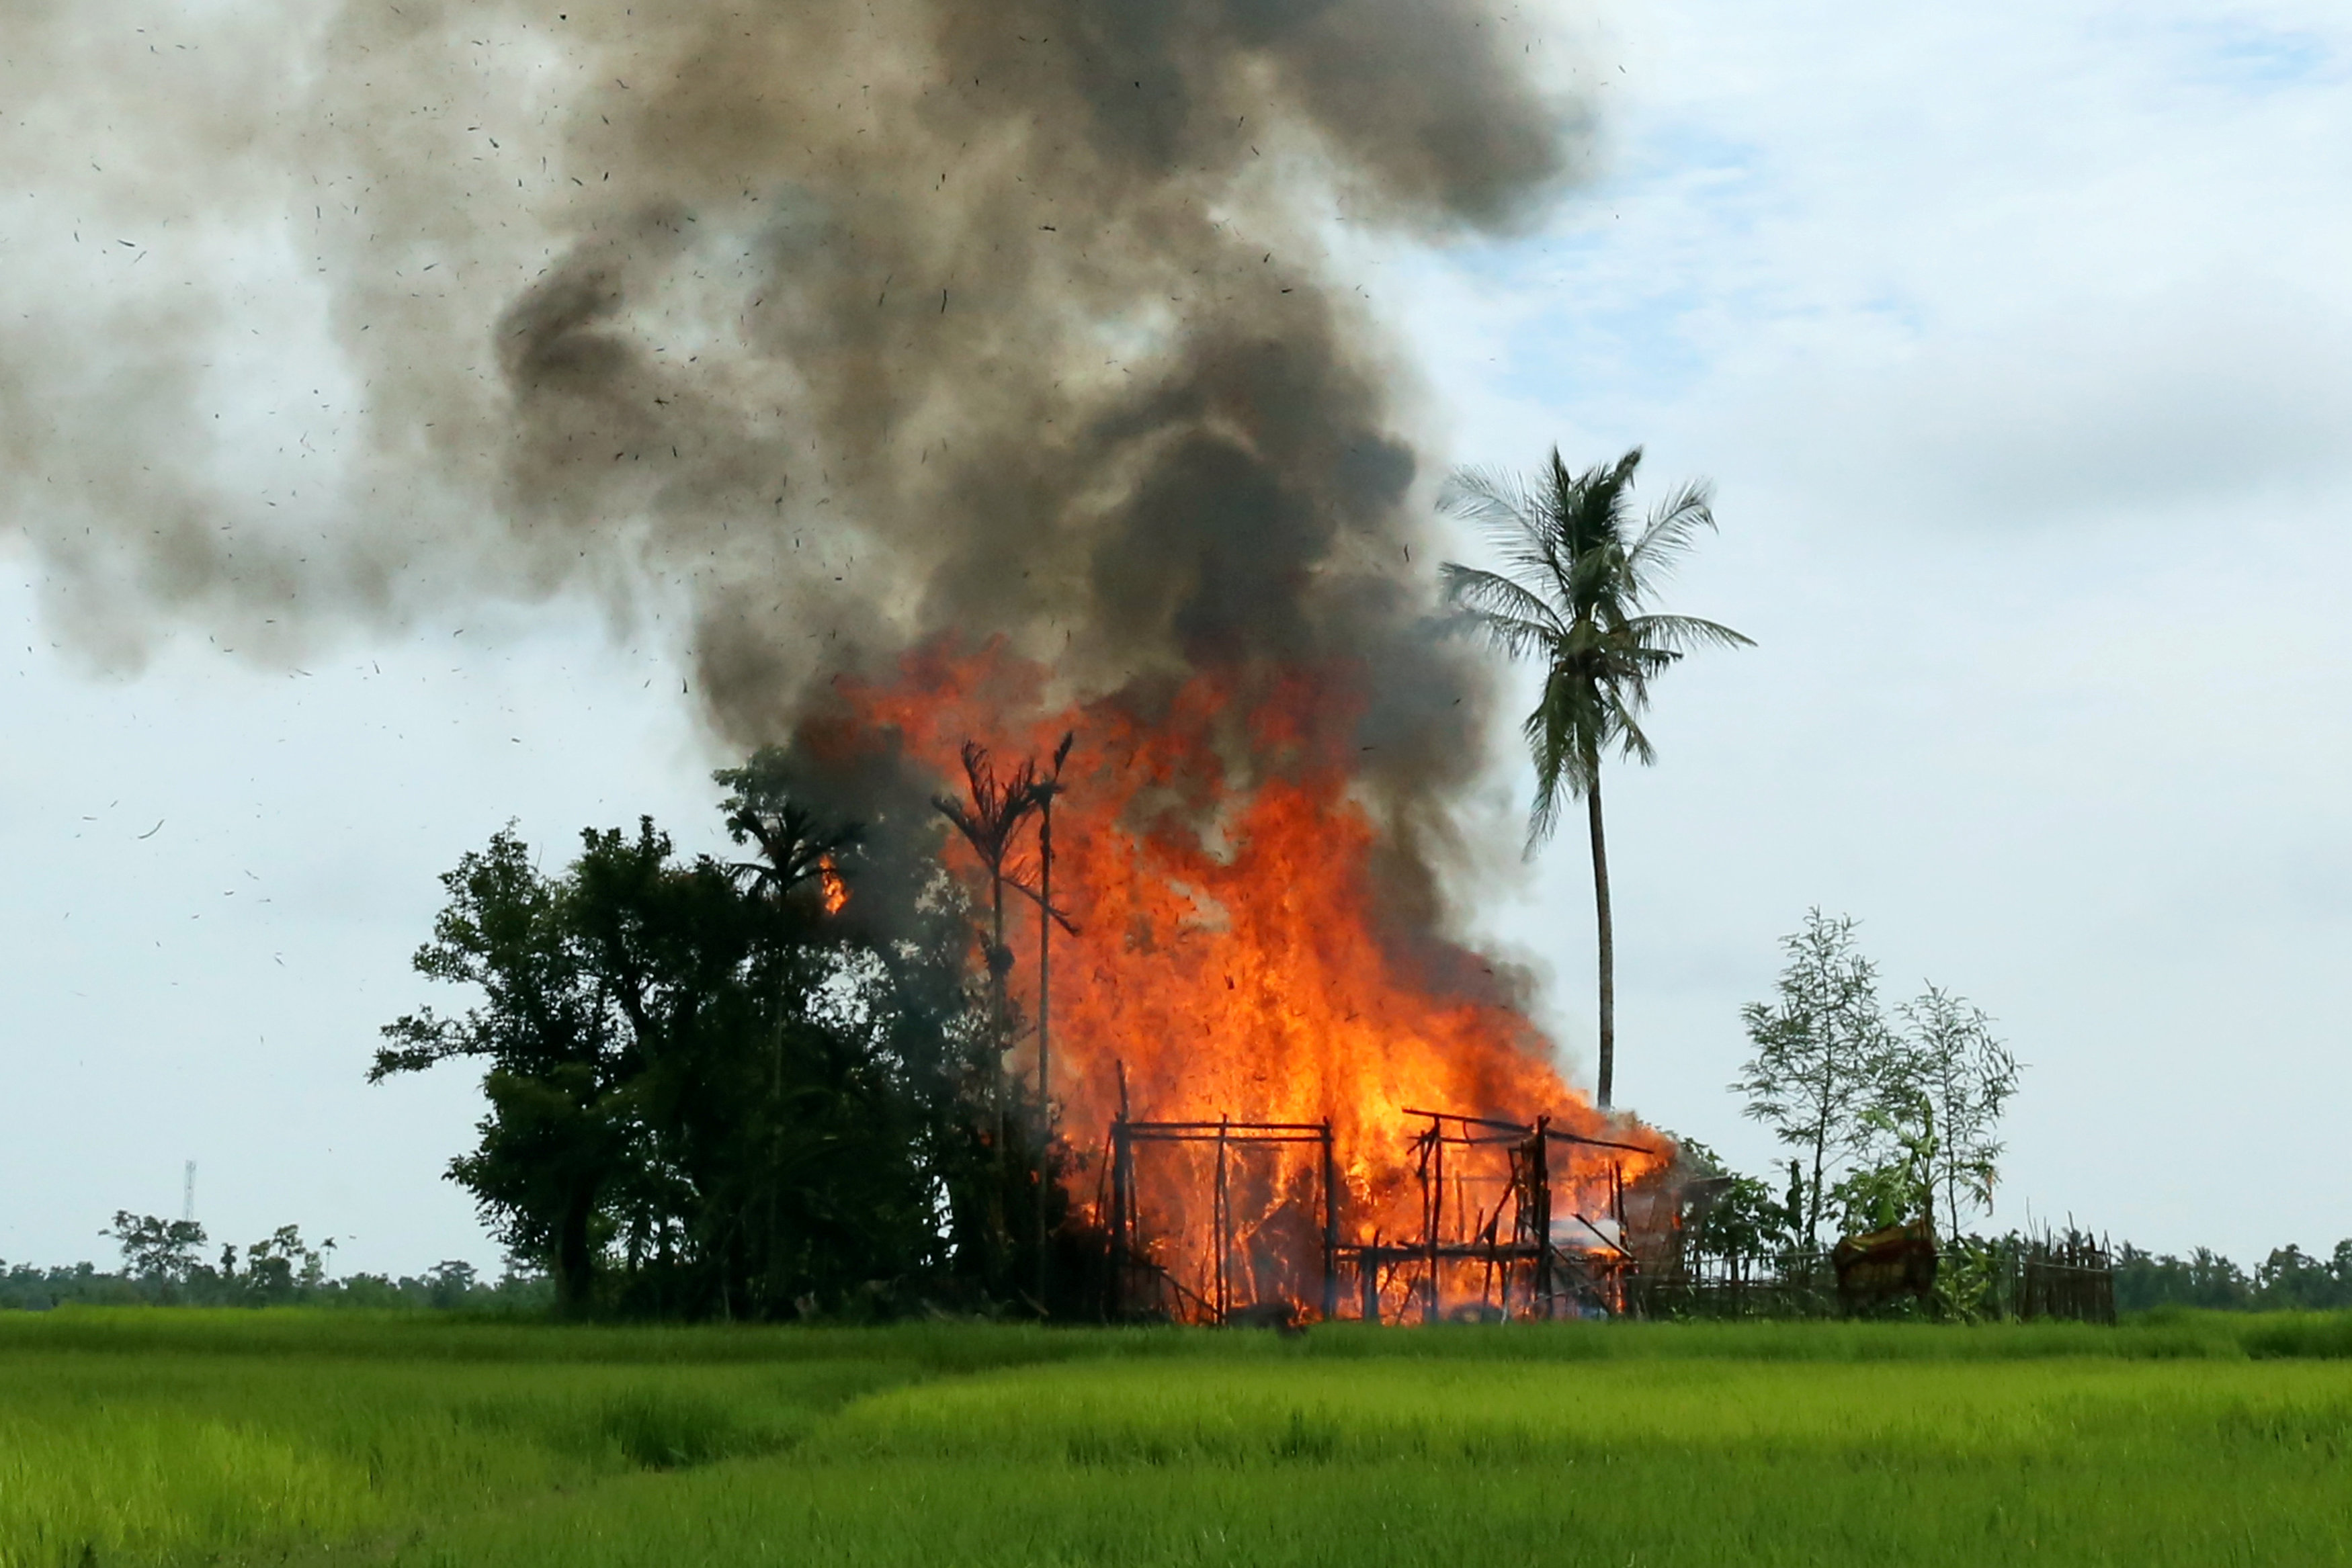 A house on fire in Gawduthar village, Maungdaw township, in the north of Rakhine state, Myanmar September 7, 2017. (Stringer—Reuters)